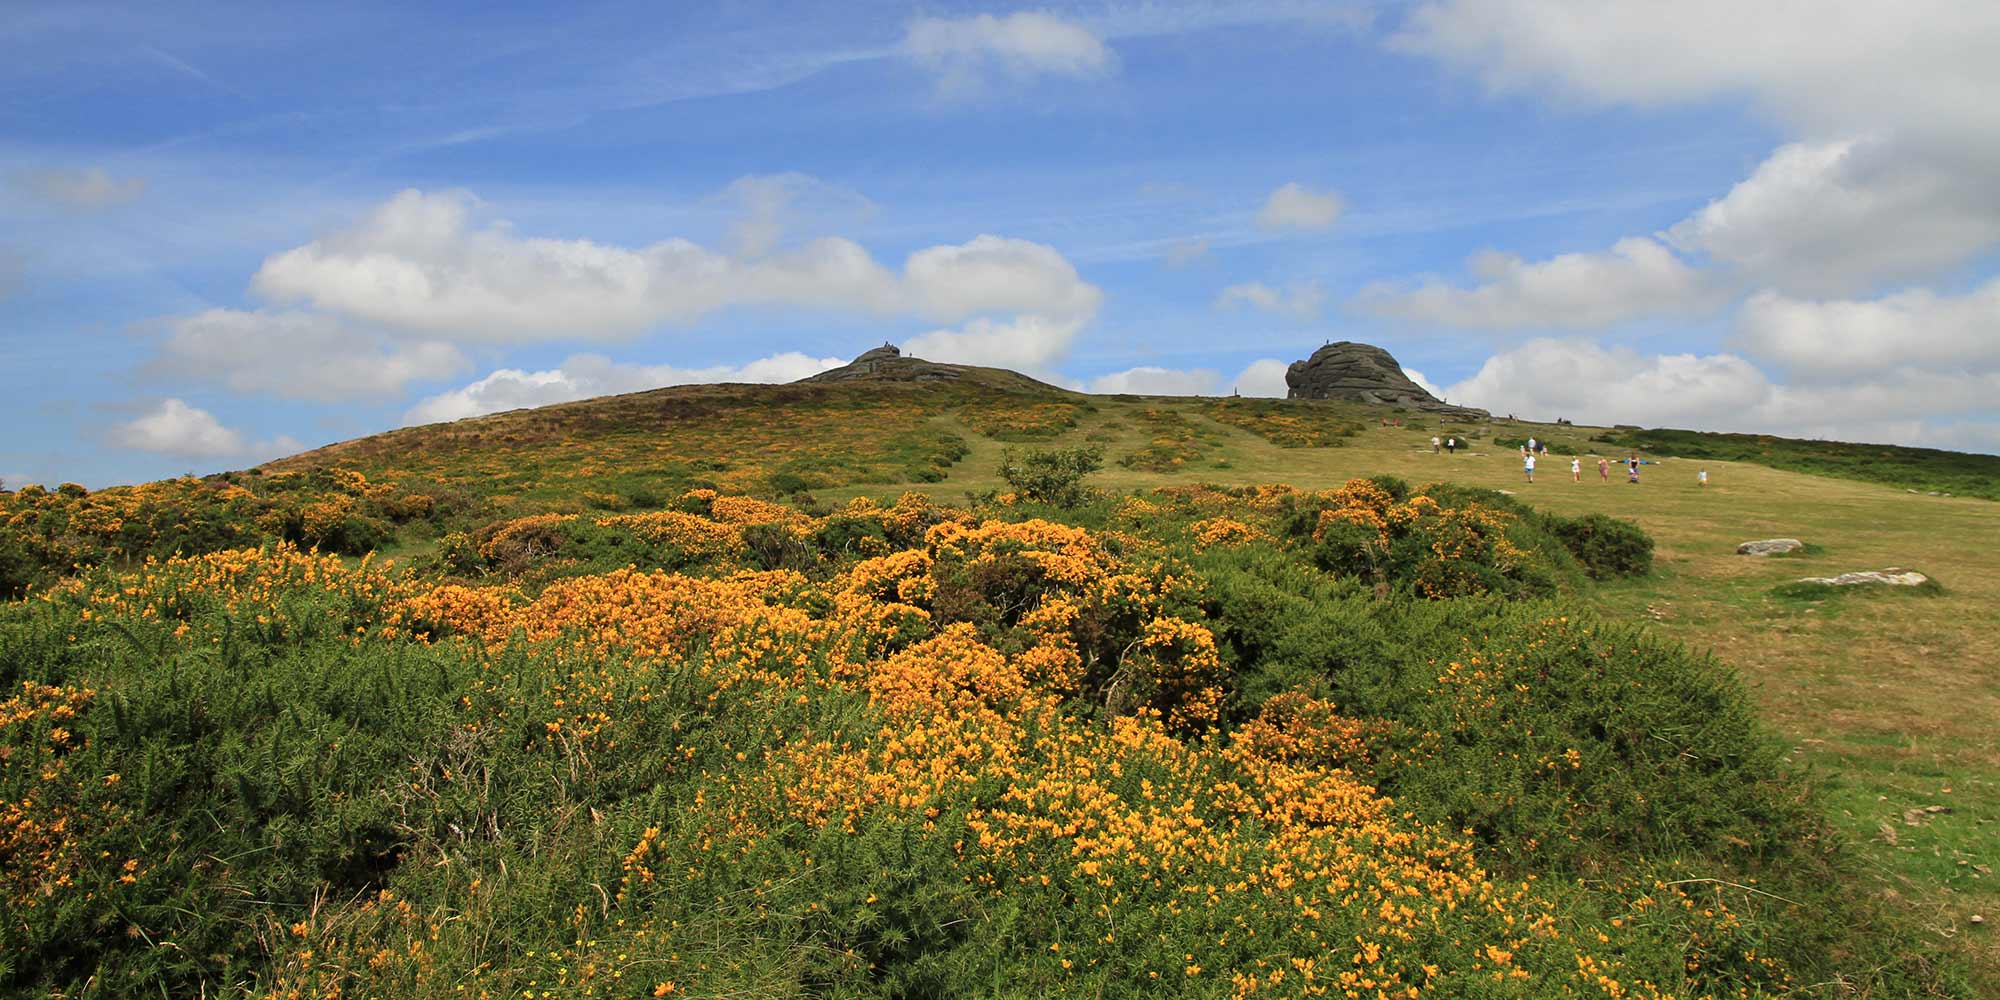 Bright yellow gorse flowers at the base of a grassy tor beneth a blue sky